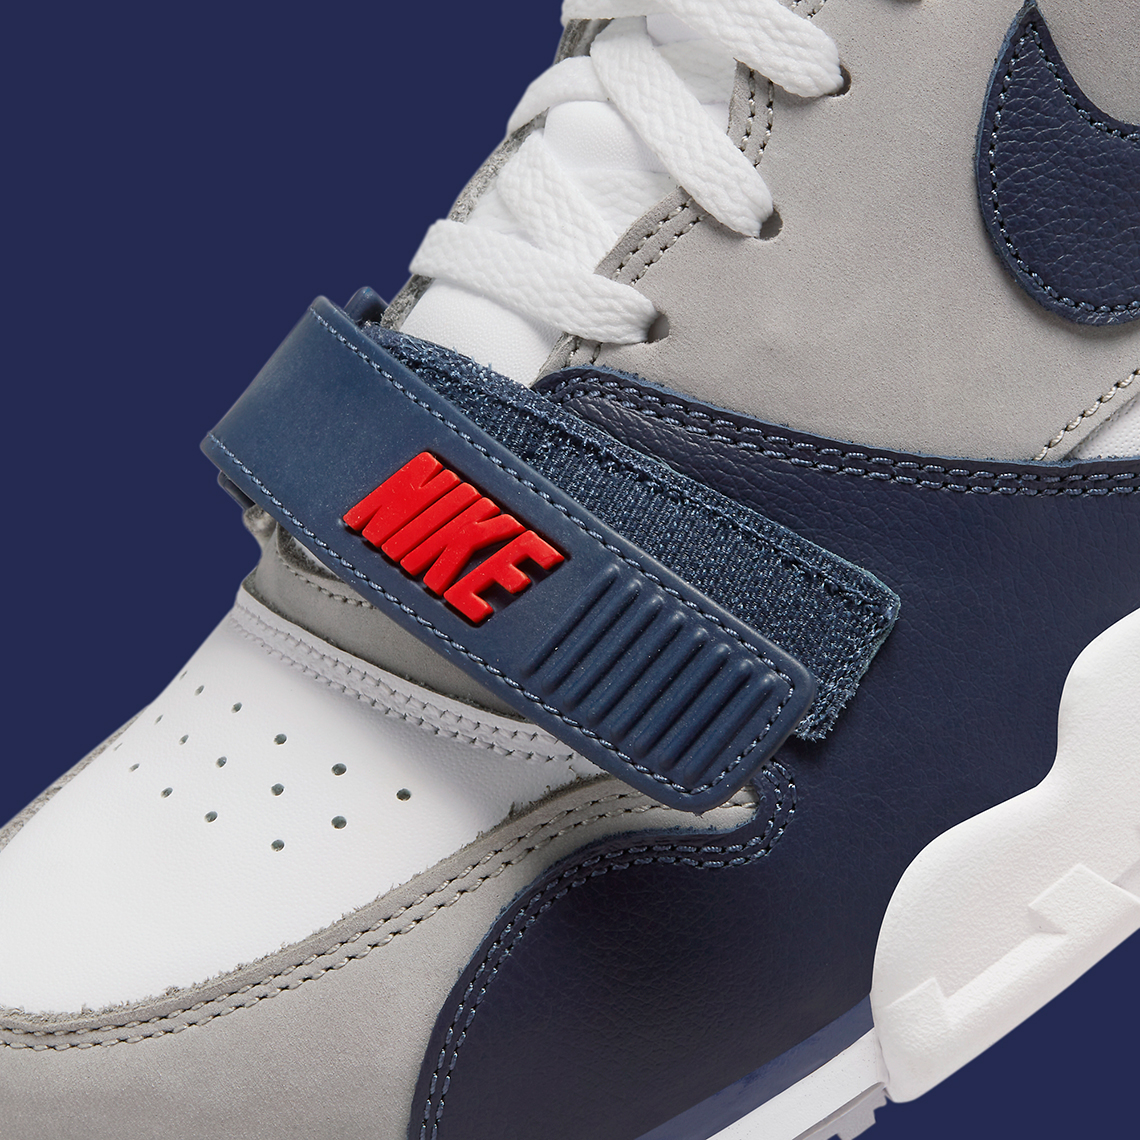 Nike Air Trainer 1 White Grey Navy Red Dm0521 1019